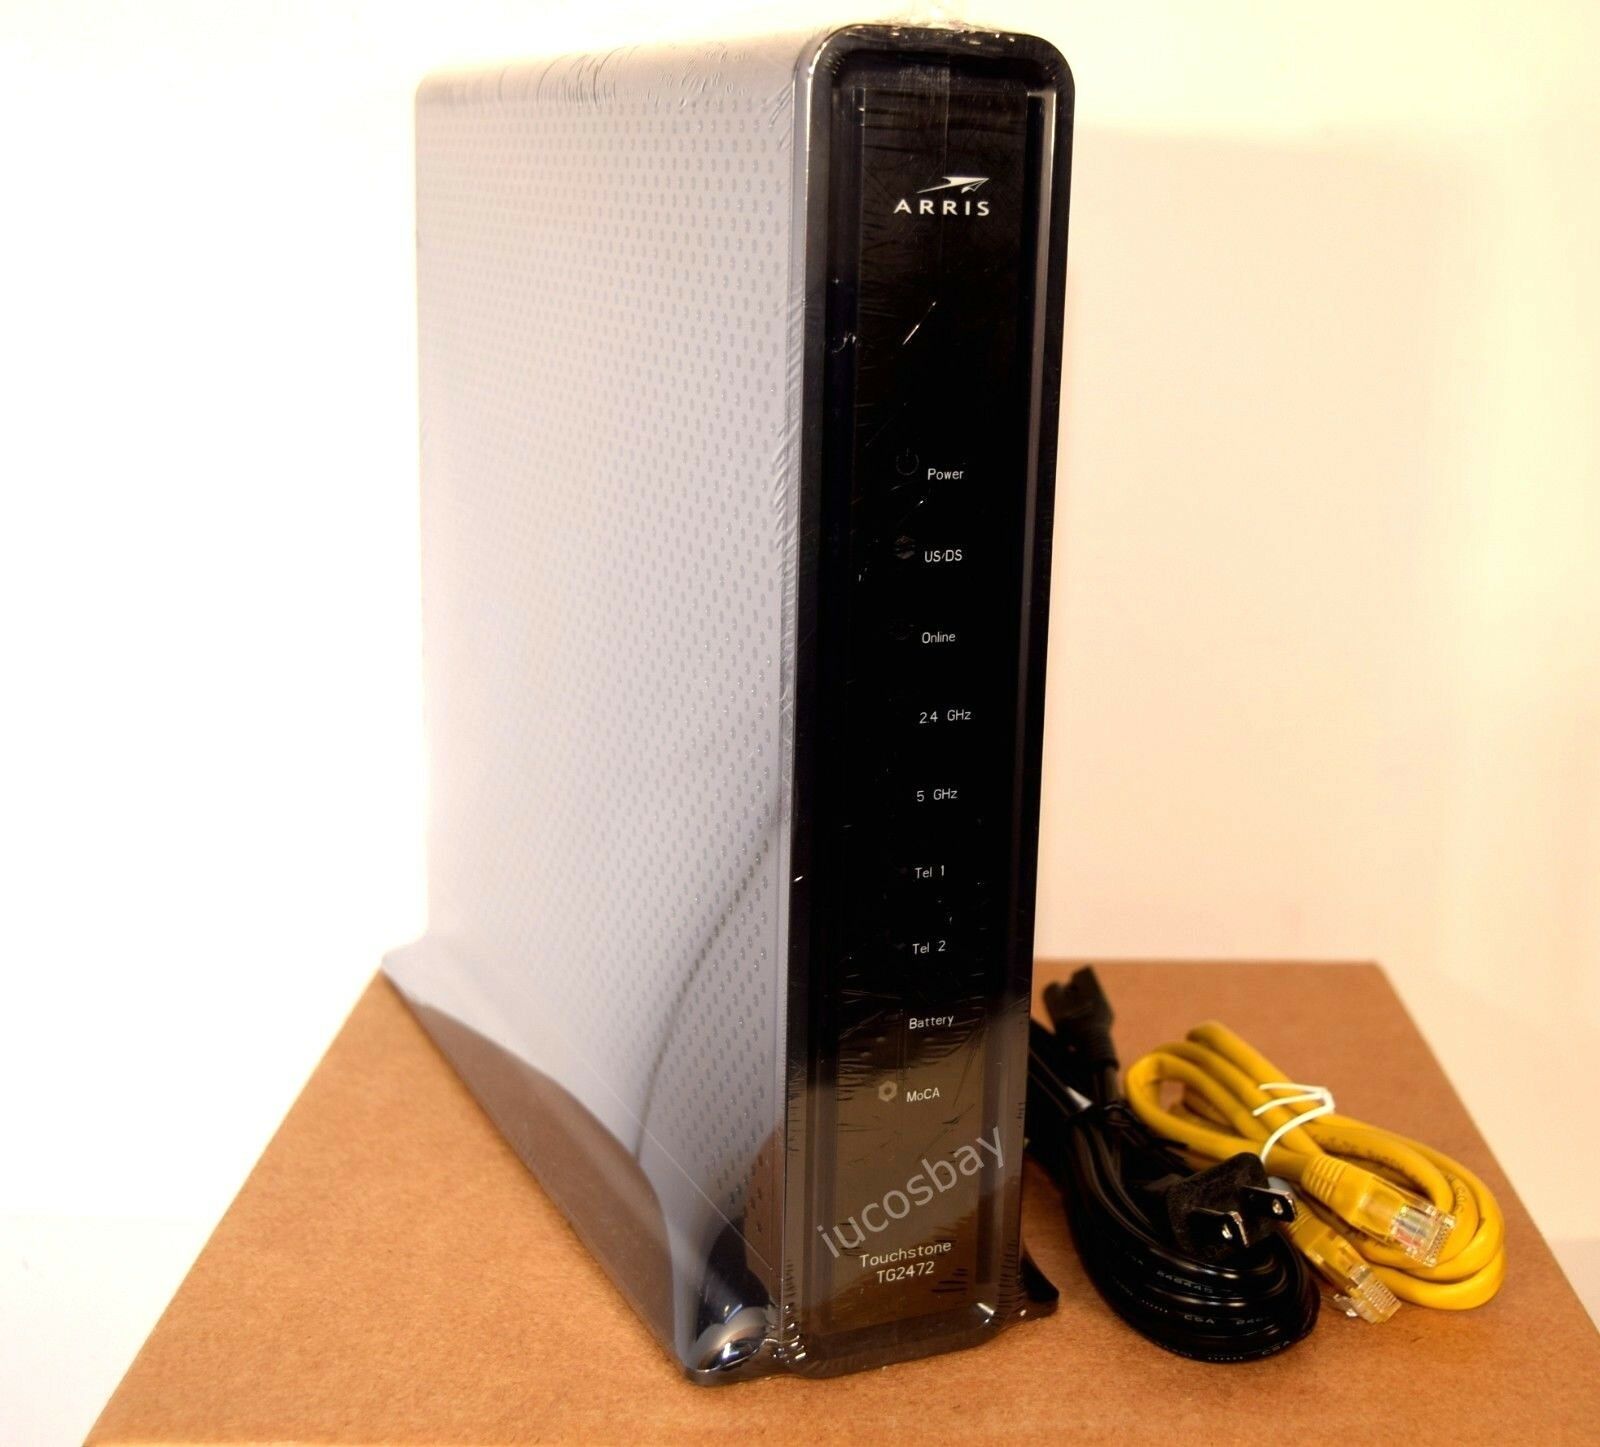 Arris Touchstone Tg2472g Docsis 3.0 Wireless Moca Telephony Cable Modem Read!!!!